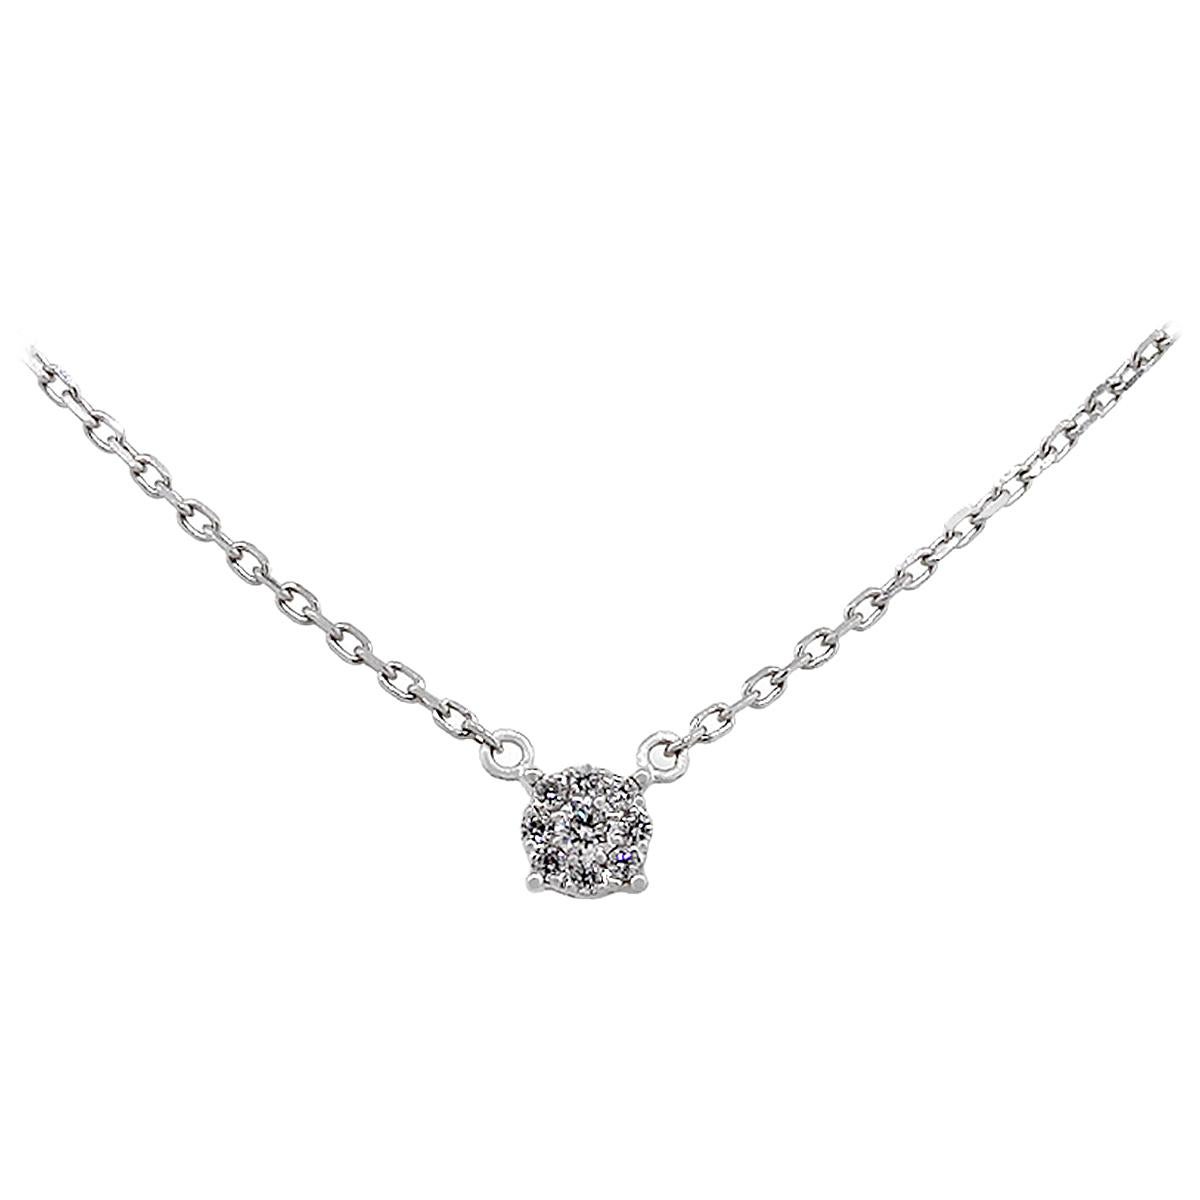 Round Diamond Cluster Pendant on Chain Necklace